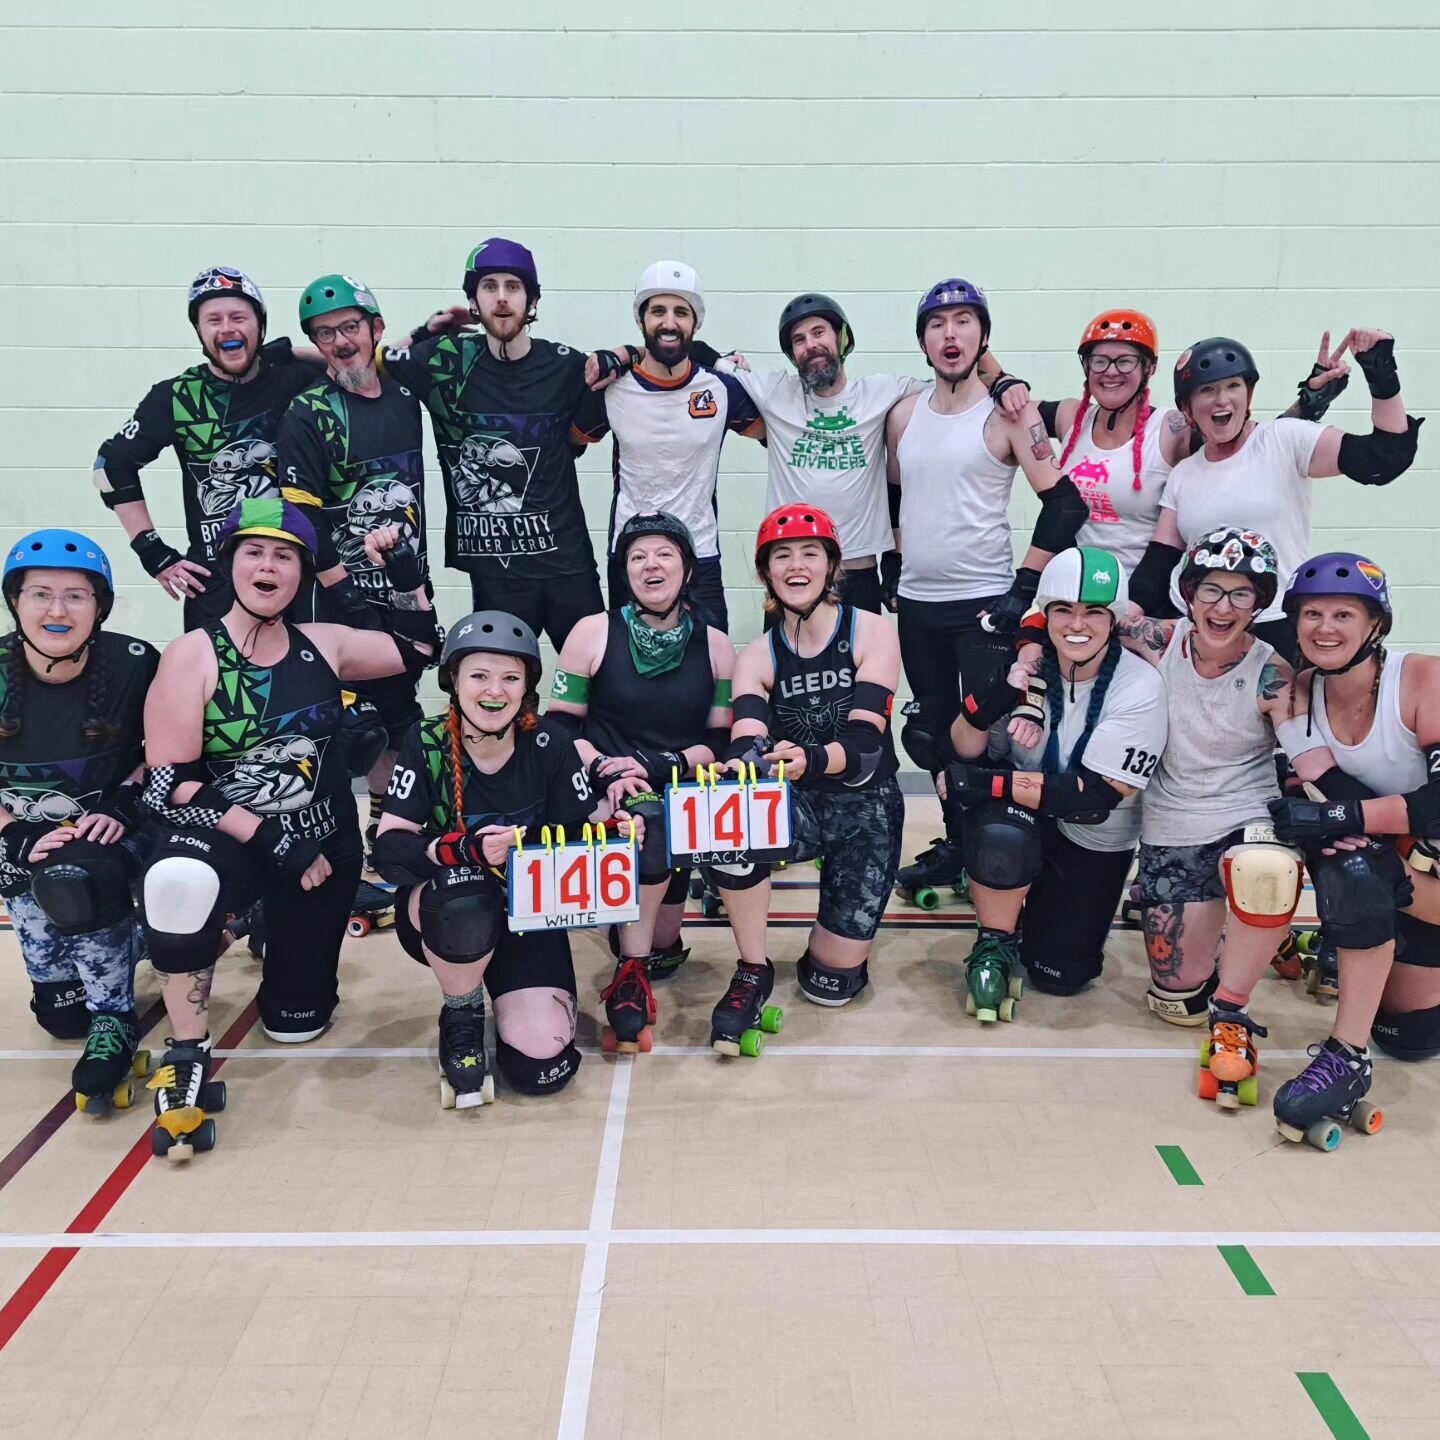 We had a wonderful open training and scrim session on Saturday with our pals from the North East! (@tsinvaders and @tyneandfear_rd) 

Until next time 👀